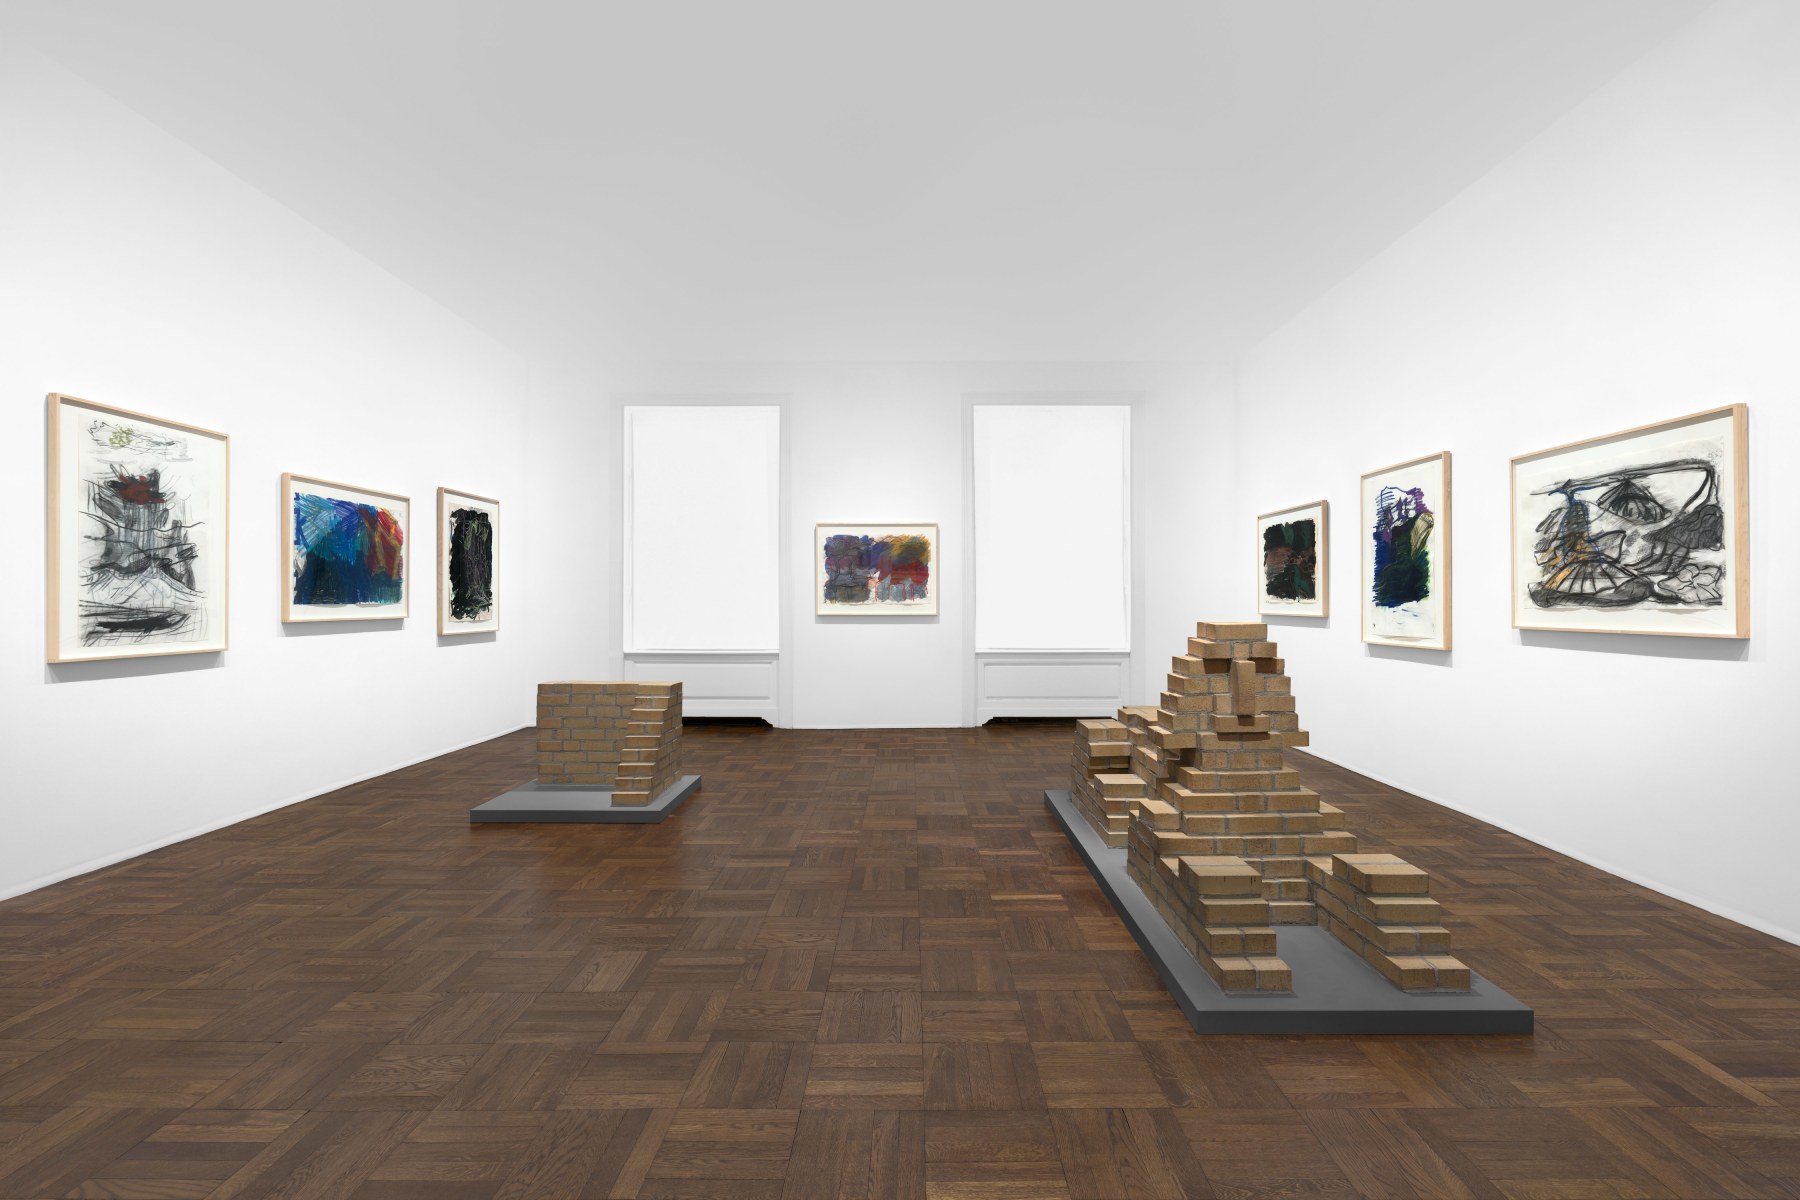 PER KIRKEBY Works on Paper, Works in Brick 20 November 2019 through 25 January 2020 UPPER EAST SIDE, NEW YORK, Installation View 2